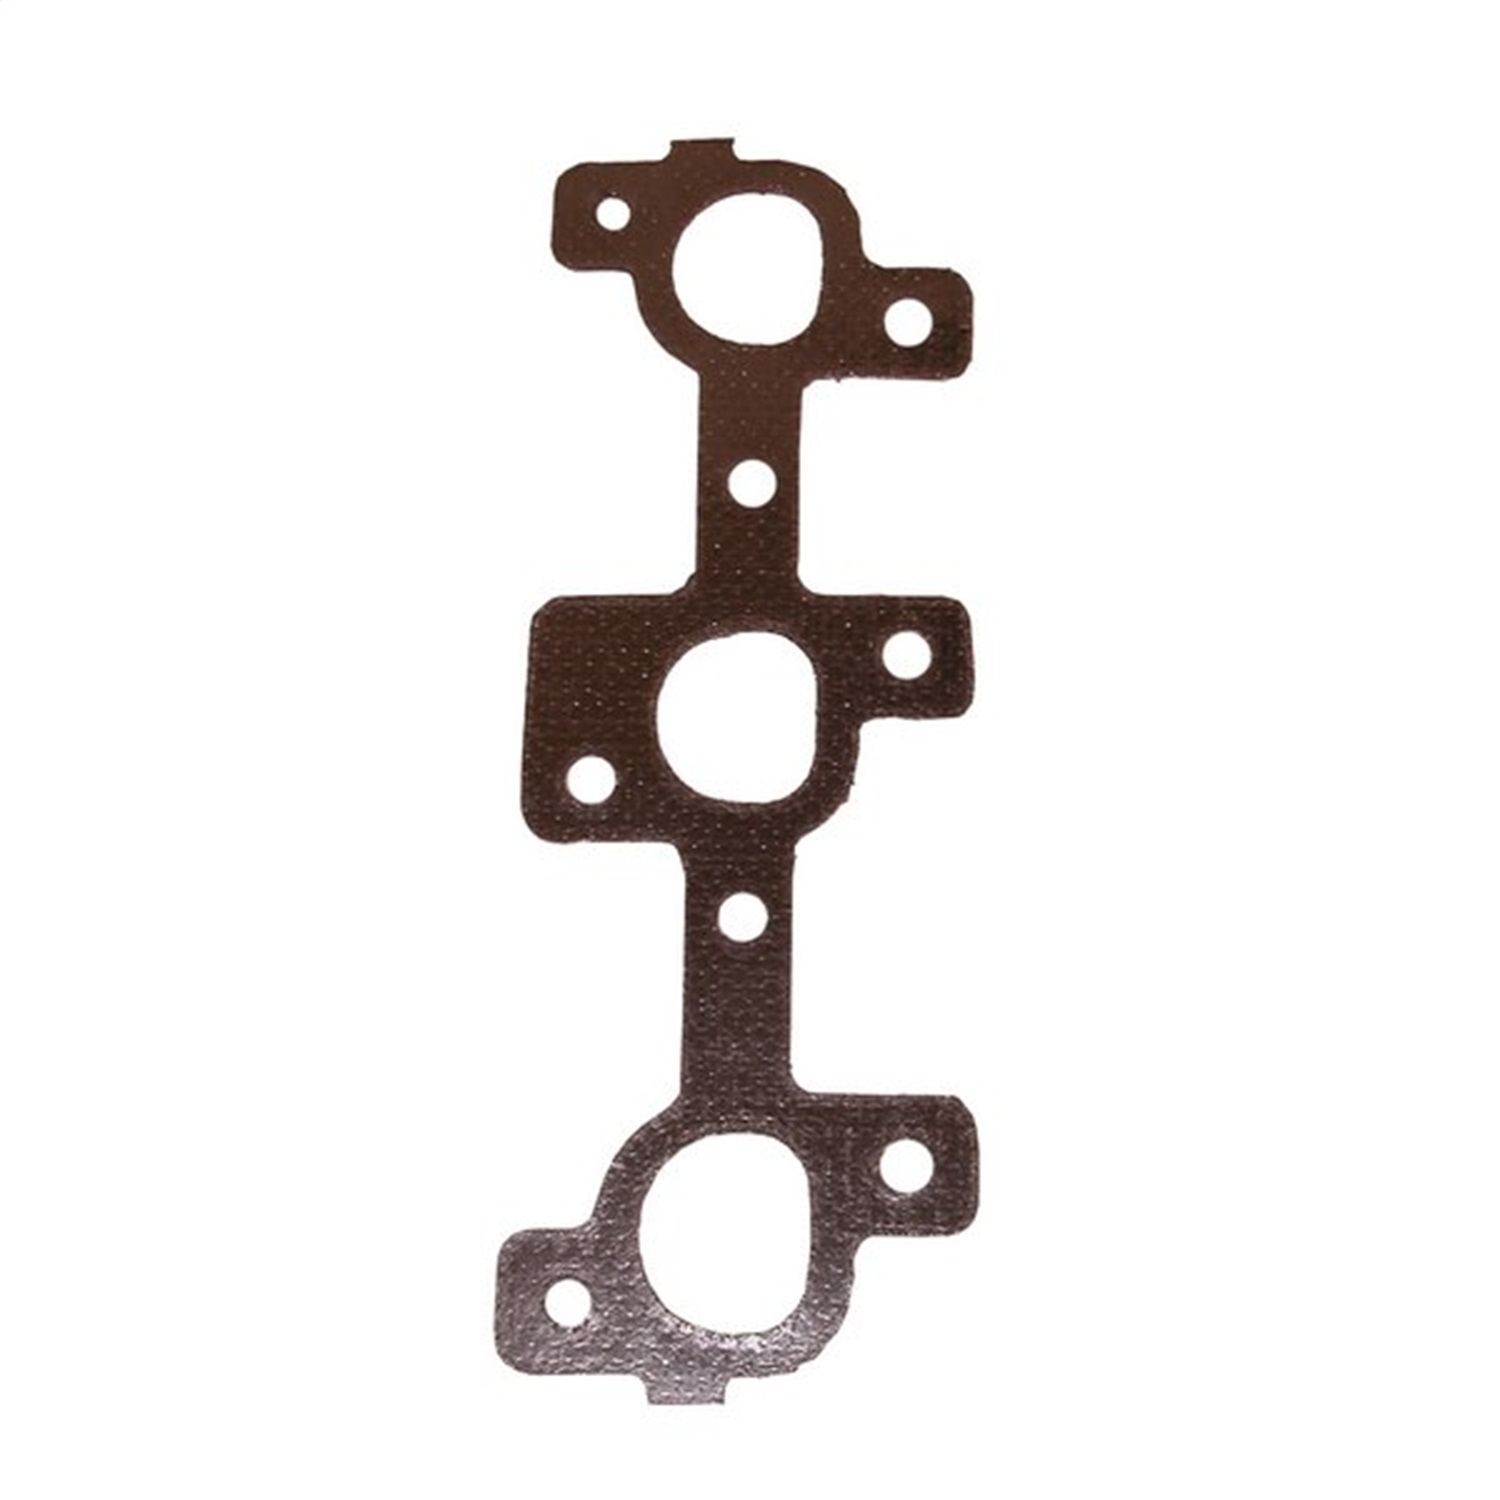 Jeep Omix Exhaust Manifold Gasket (3.7L), Left, 2002-2007 Liberty, 2005-2007 Grand Cherokee,